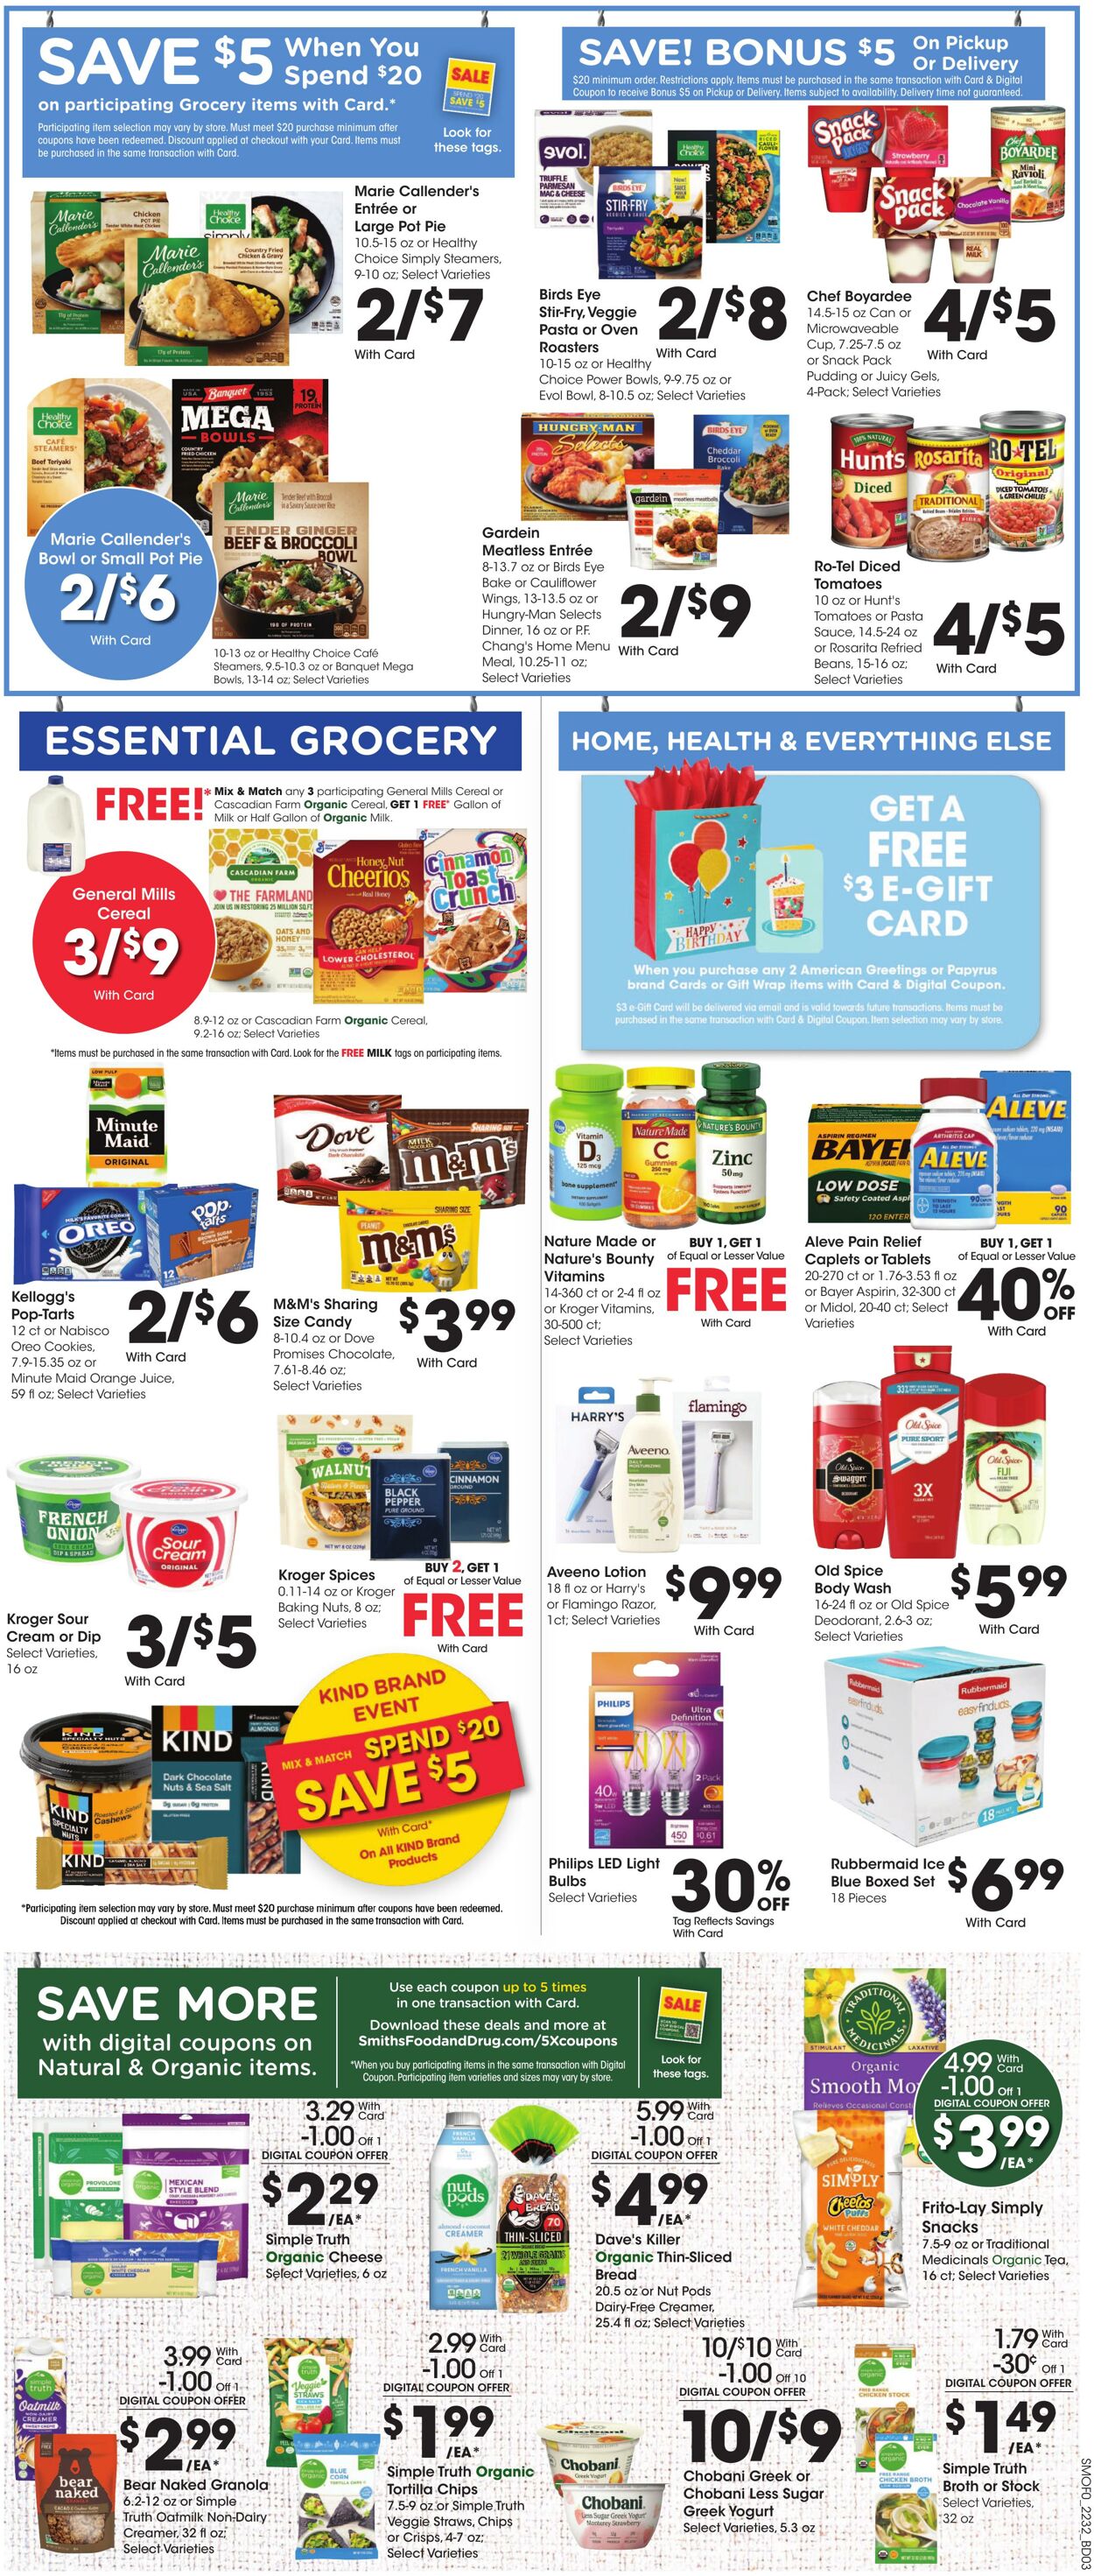 Weekly ad Smith’s Food and Drug 09/07/2022 - 09/13/2022